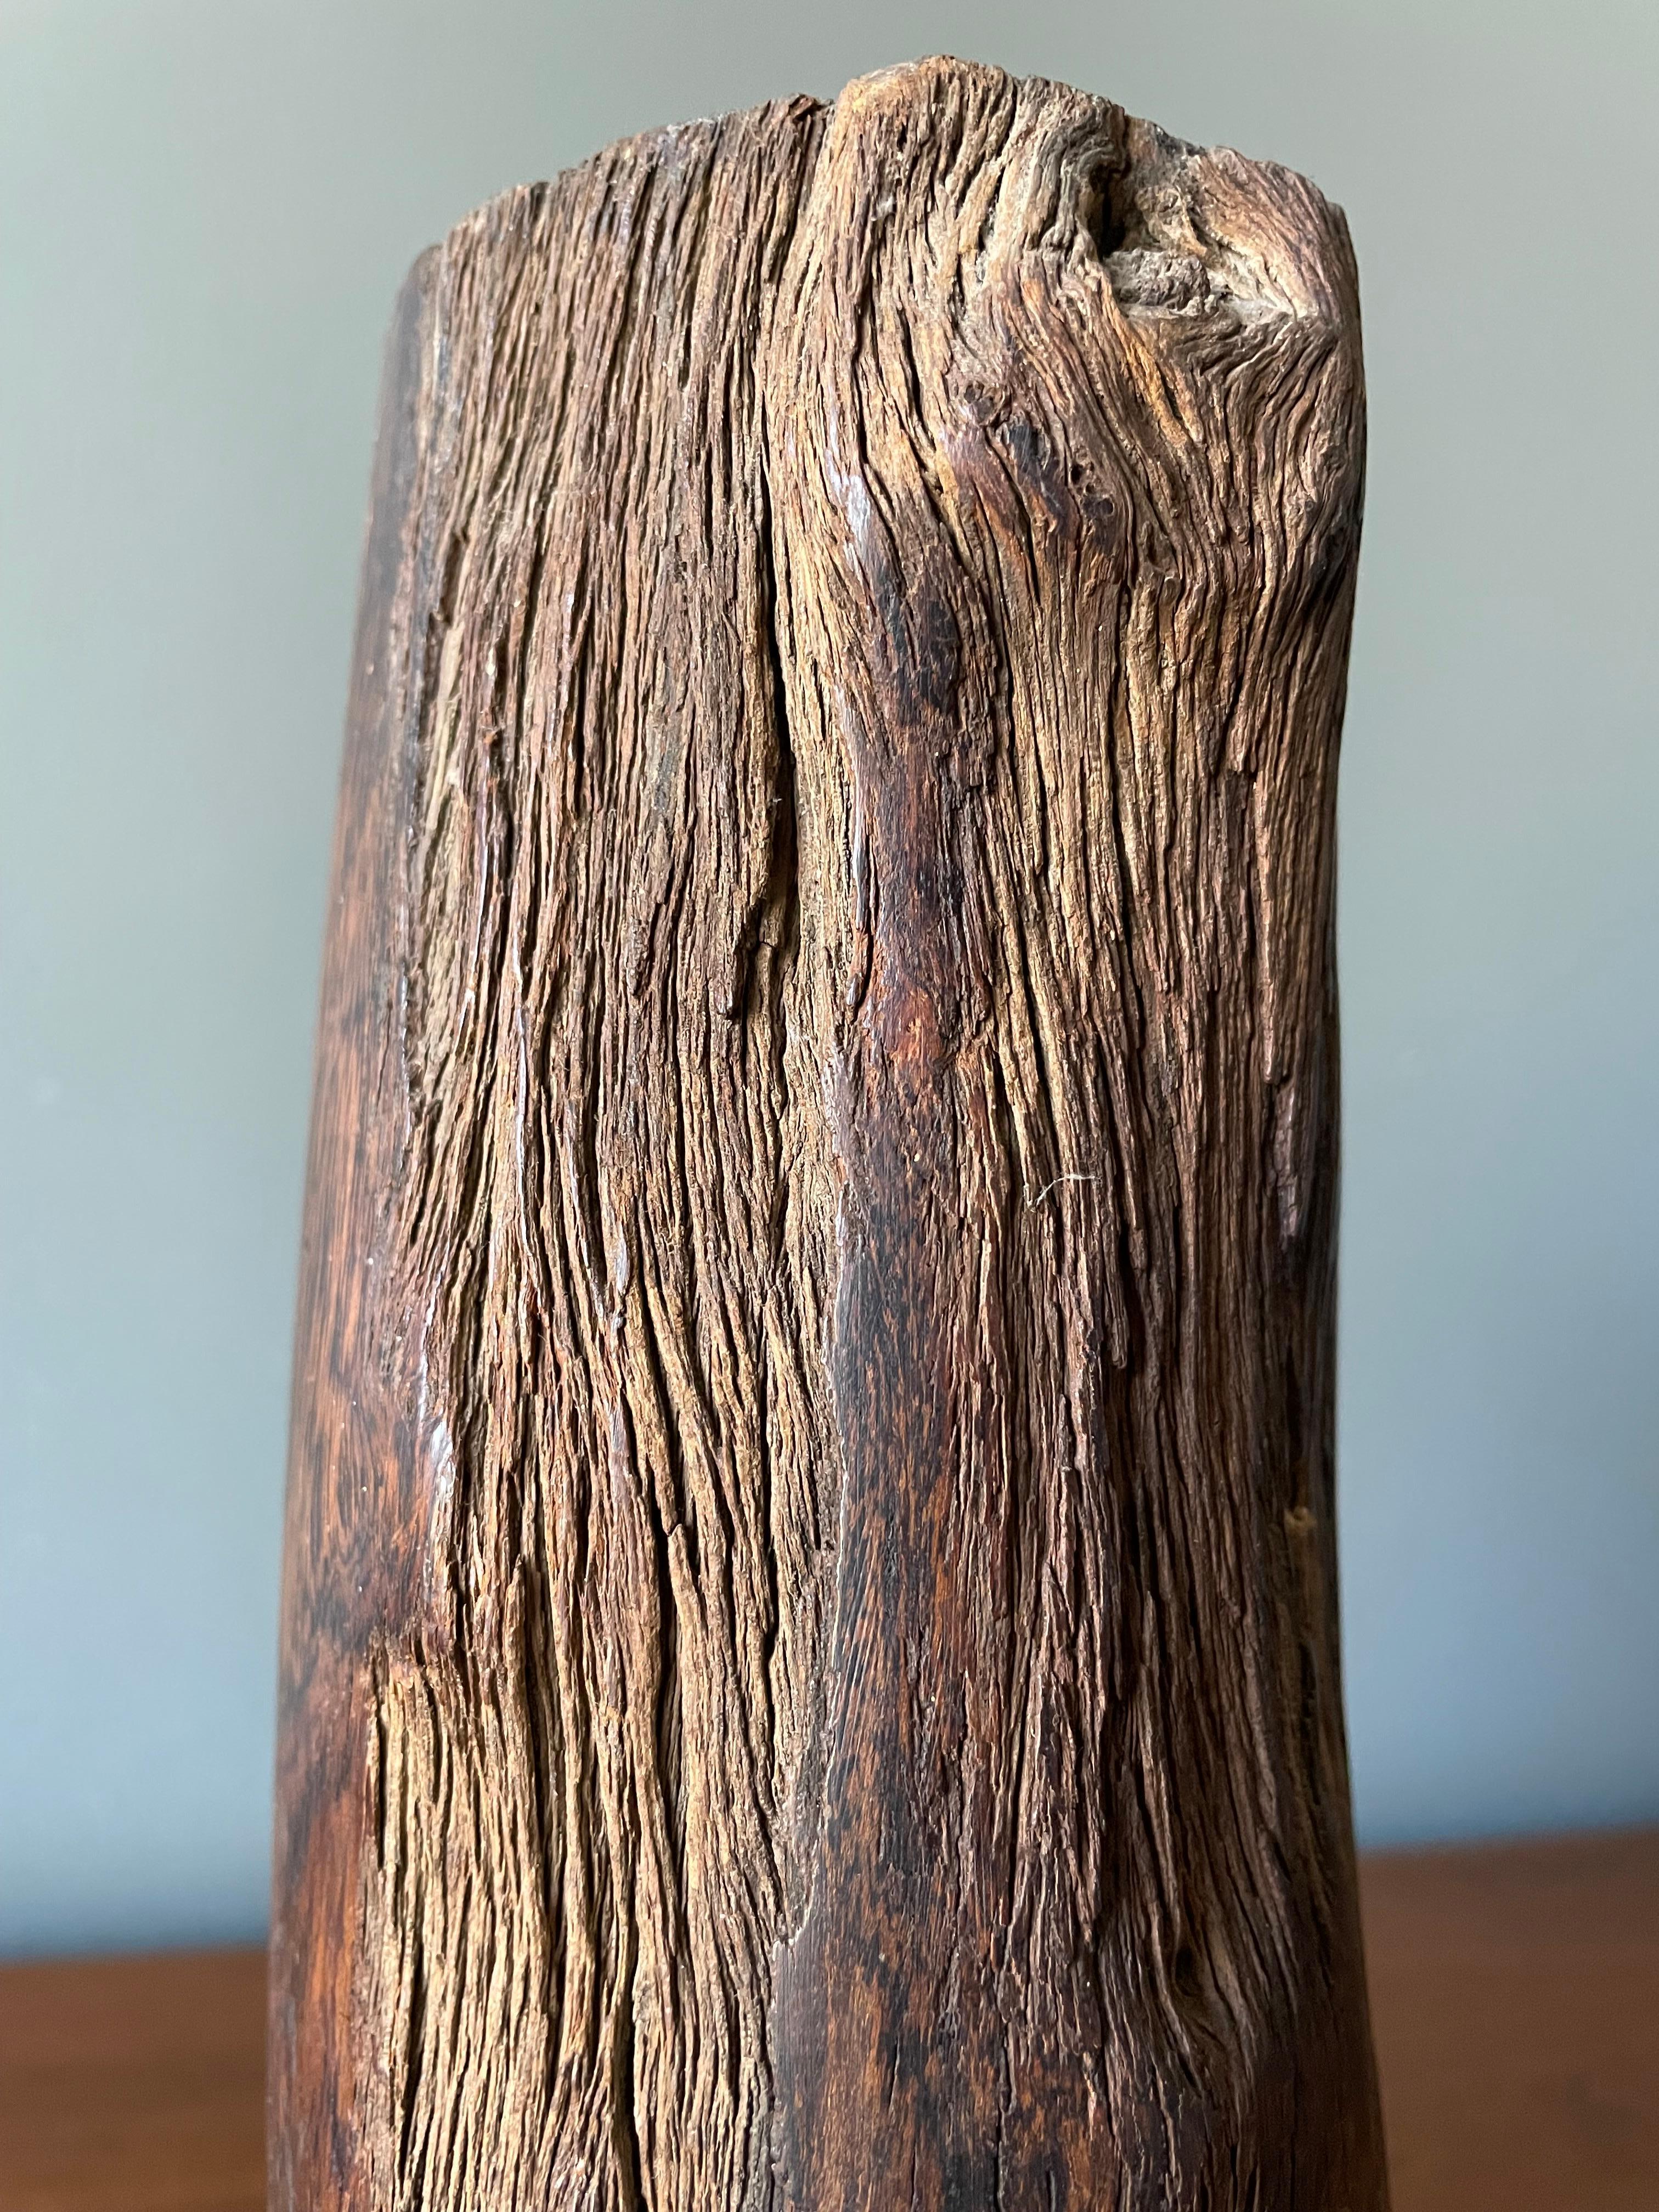 American Handcrafted Solid Rosewood Candle Holder For Sale